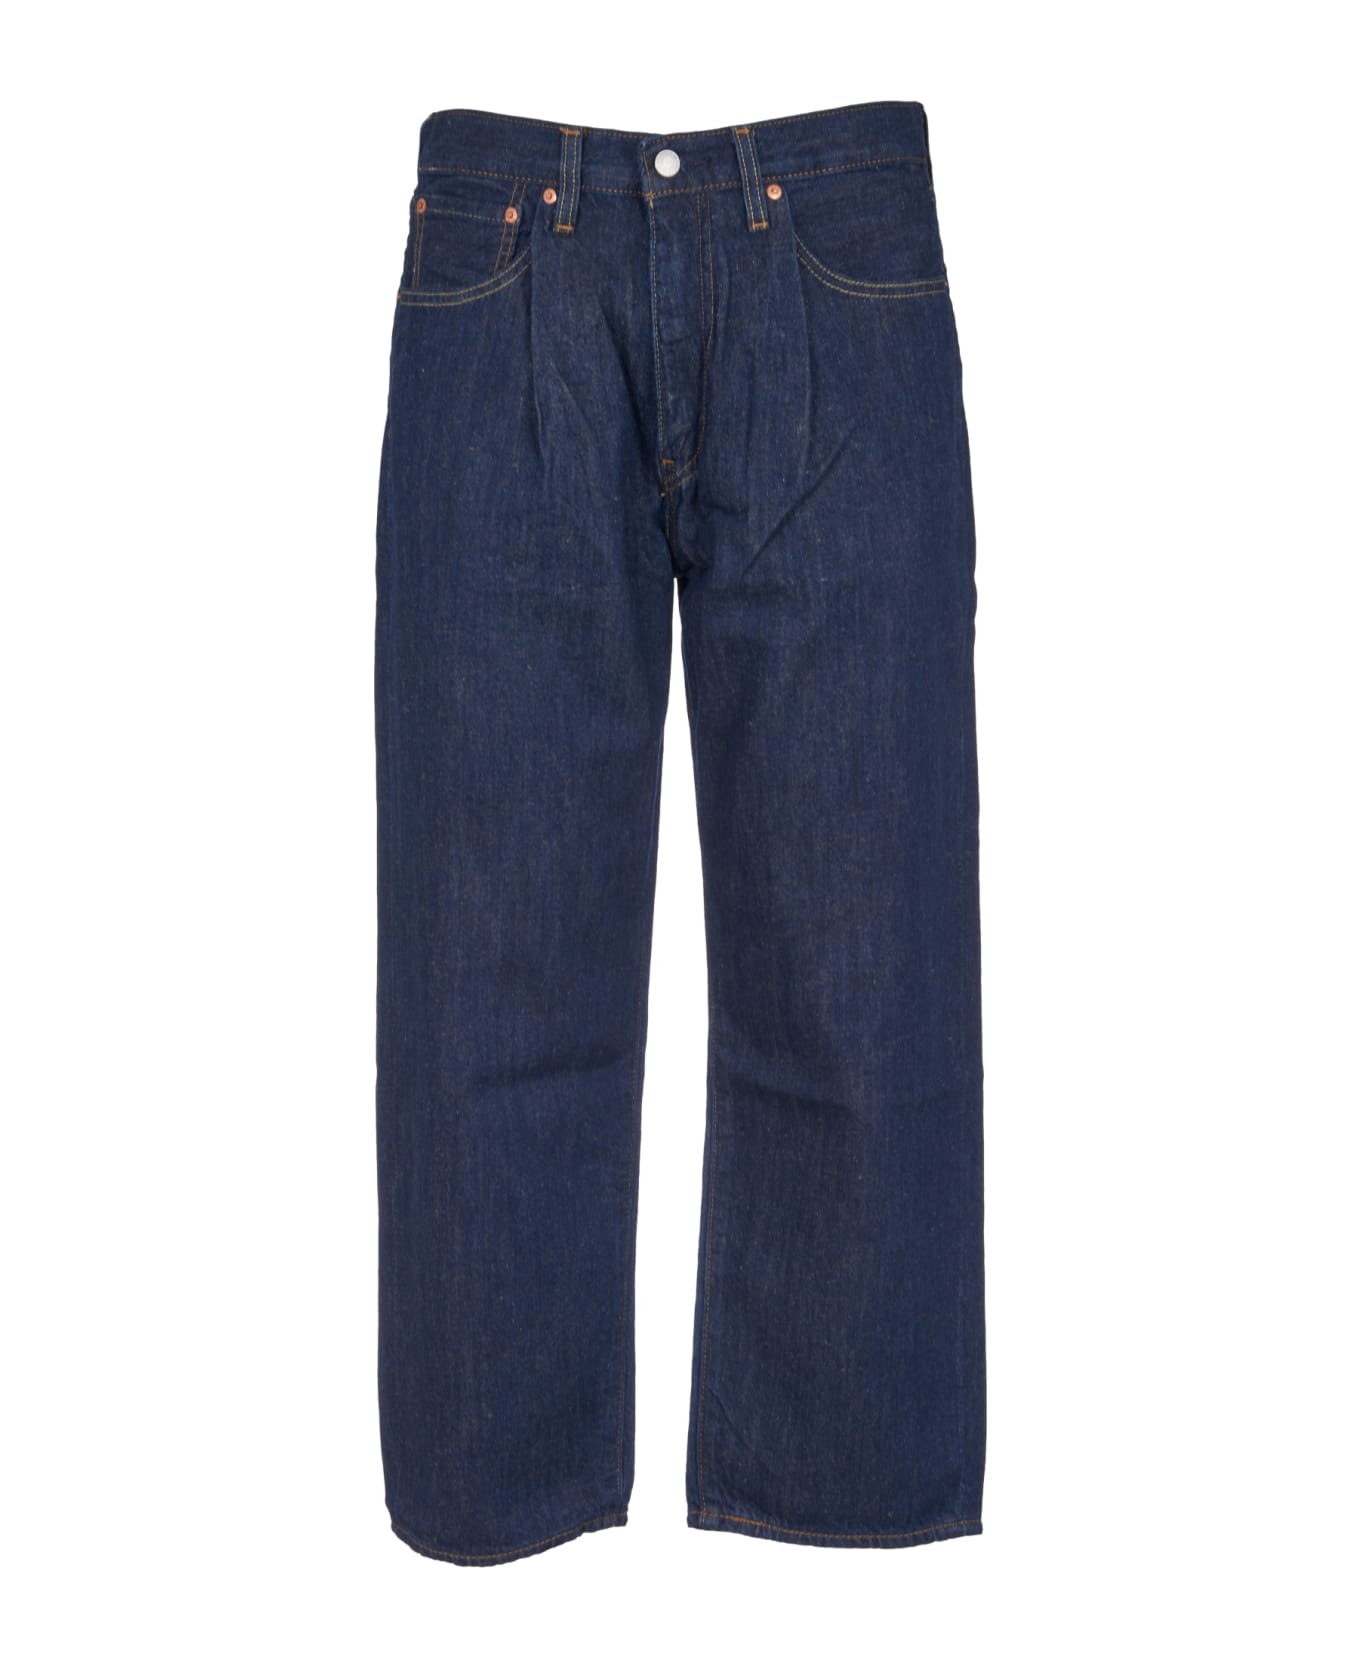 Levi's Buttoned Cropped Jeans - Blue